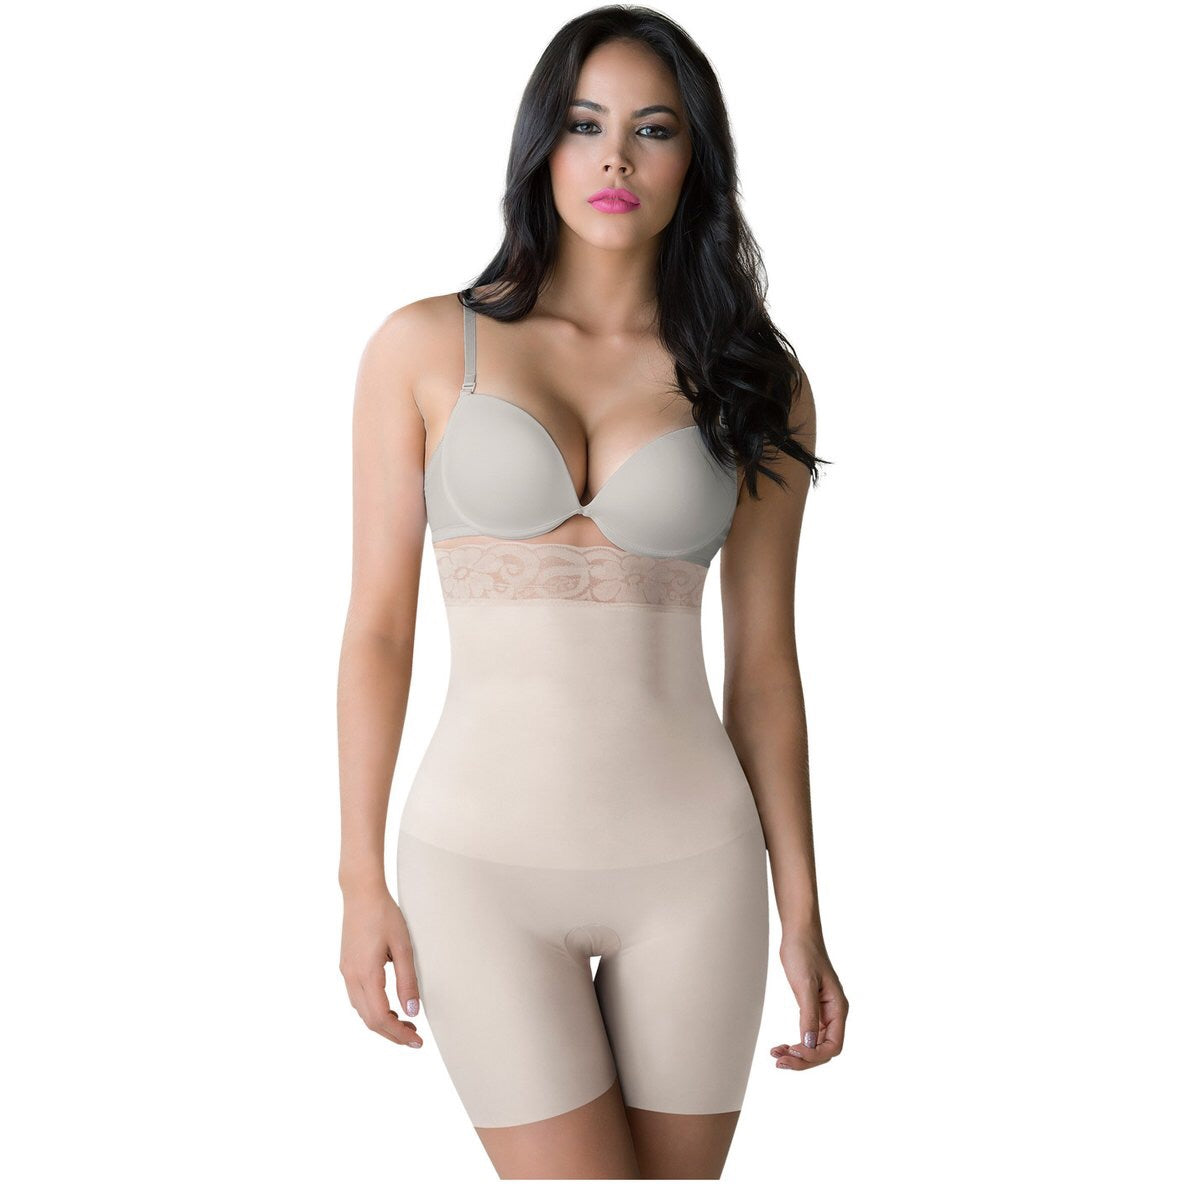 Strapless girdle  Shapes the waist and flattens the abdomen. – Fajas  Colombianas Sale